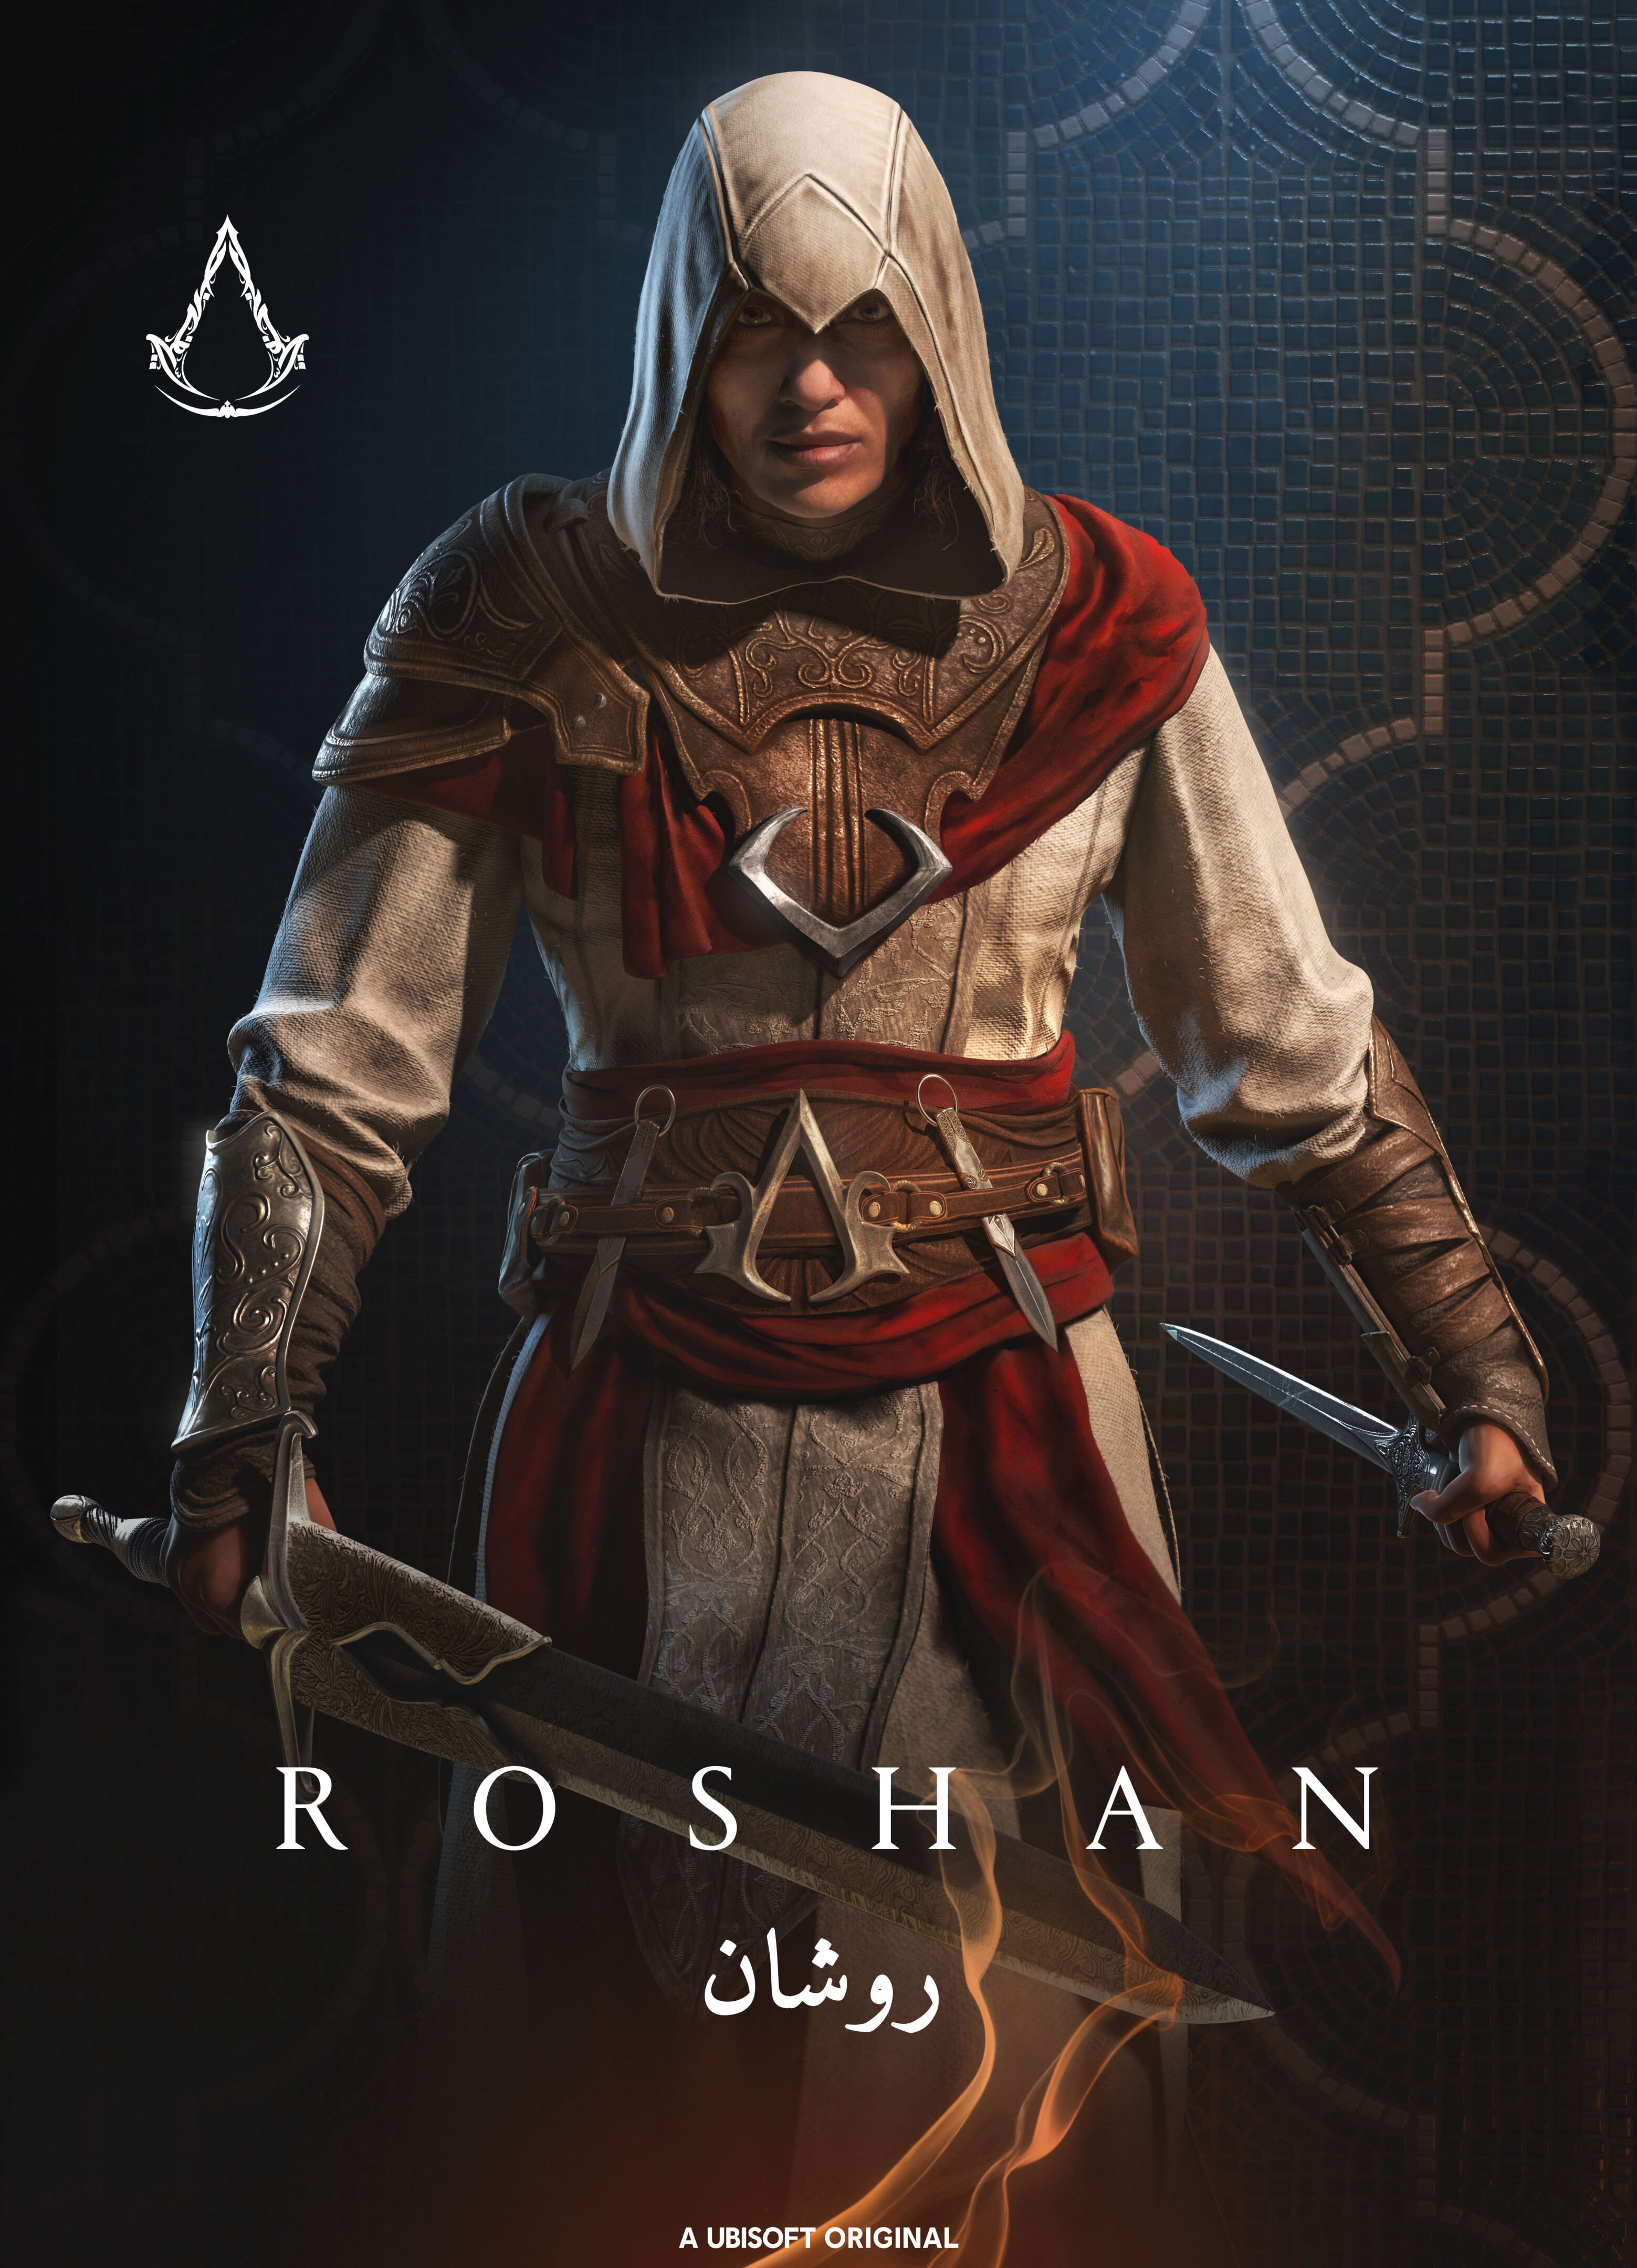 Assassin's Creed® Mirage Is Available Now - Comix Asylum